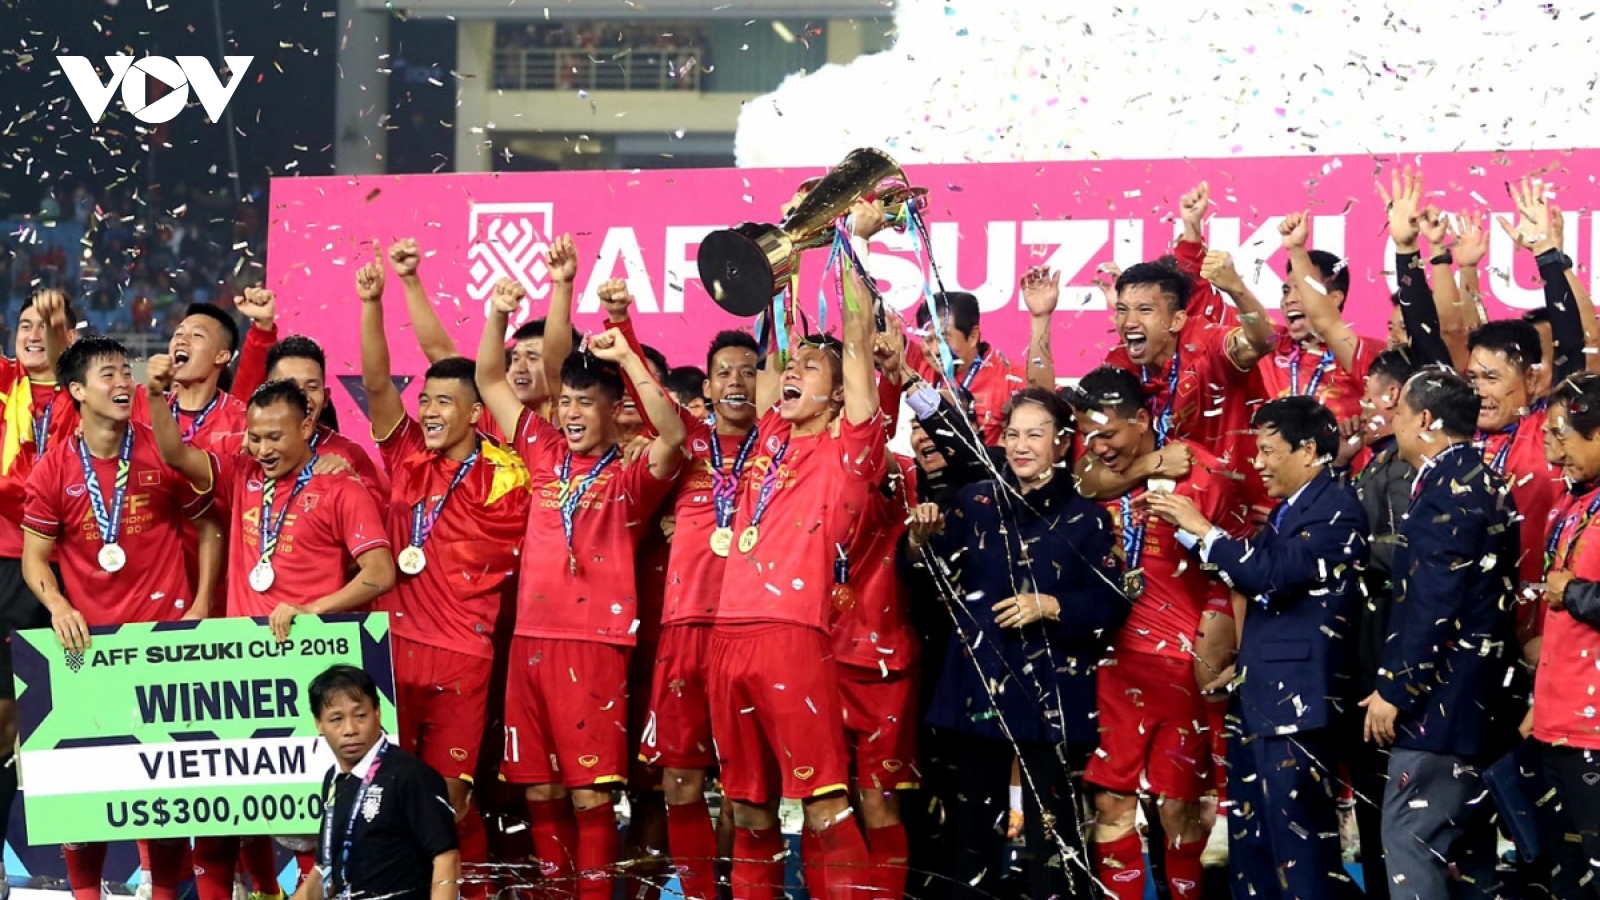 AFF Cup 2020 draw to take place in Singapore this month